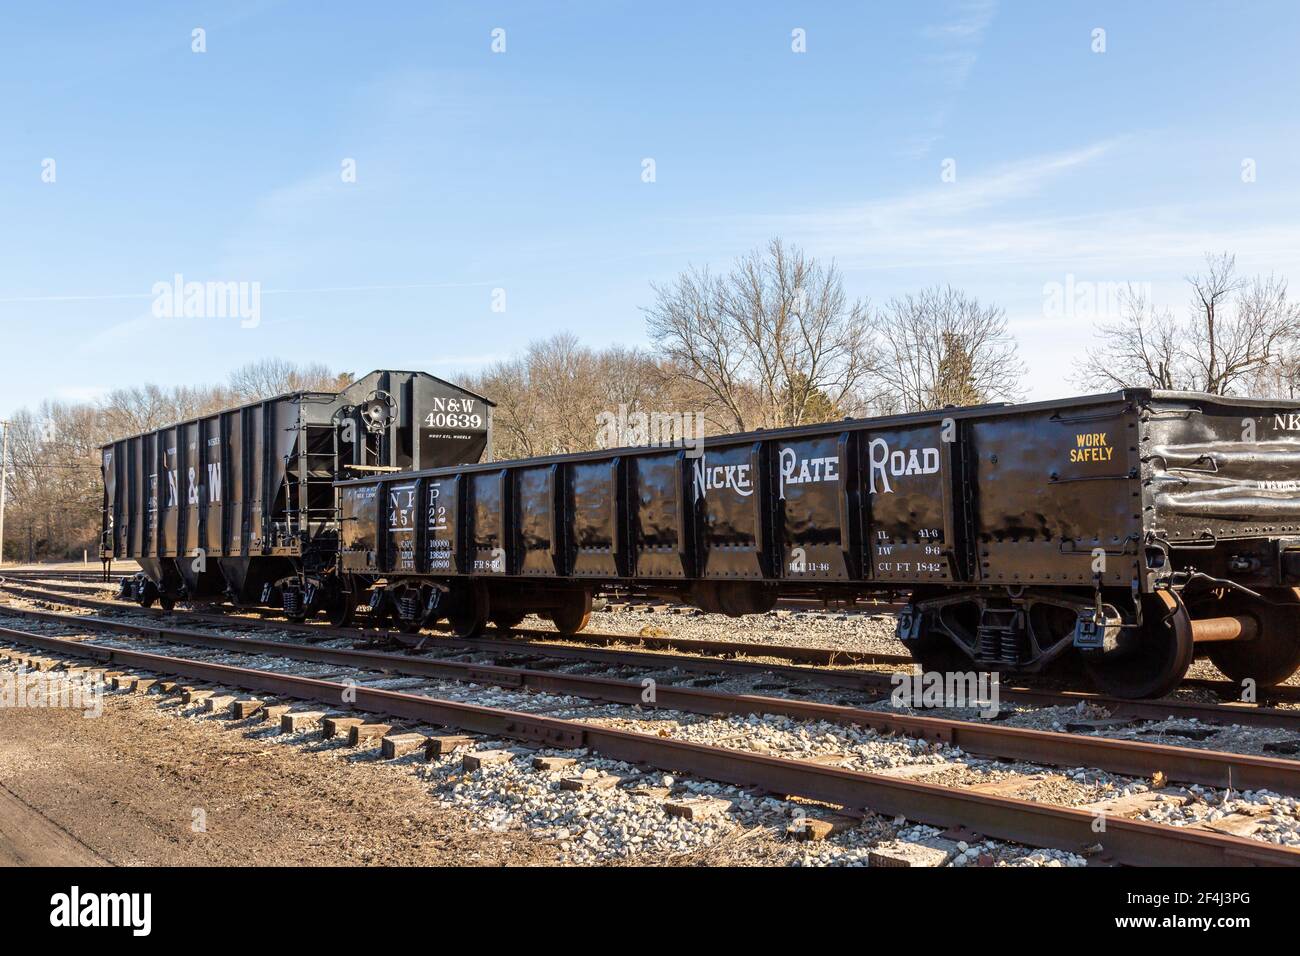 Restored antique Norfolk and Western and Nickel Plate Road rail cars sit o display at the Hoosier Valley Railroad Museum in North Judson, Indiana, USA Stock Photo